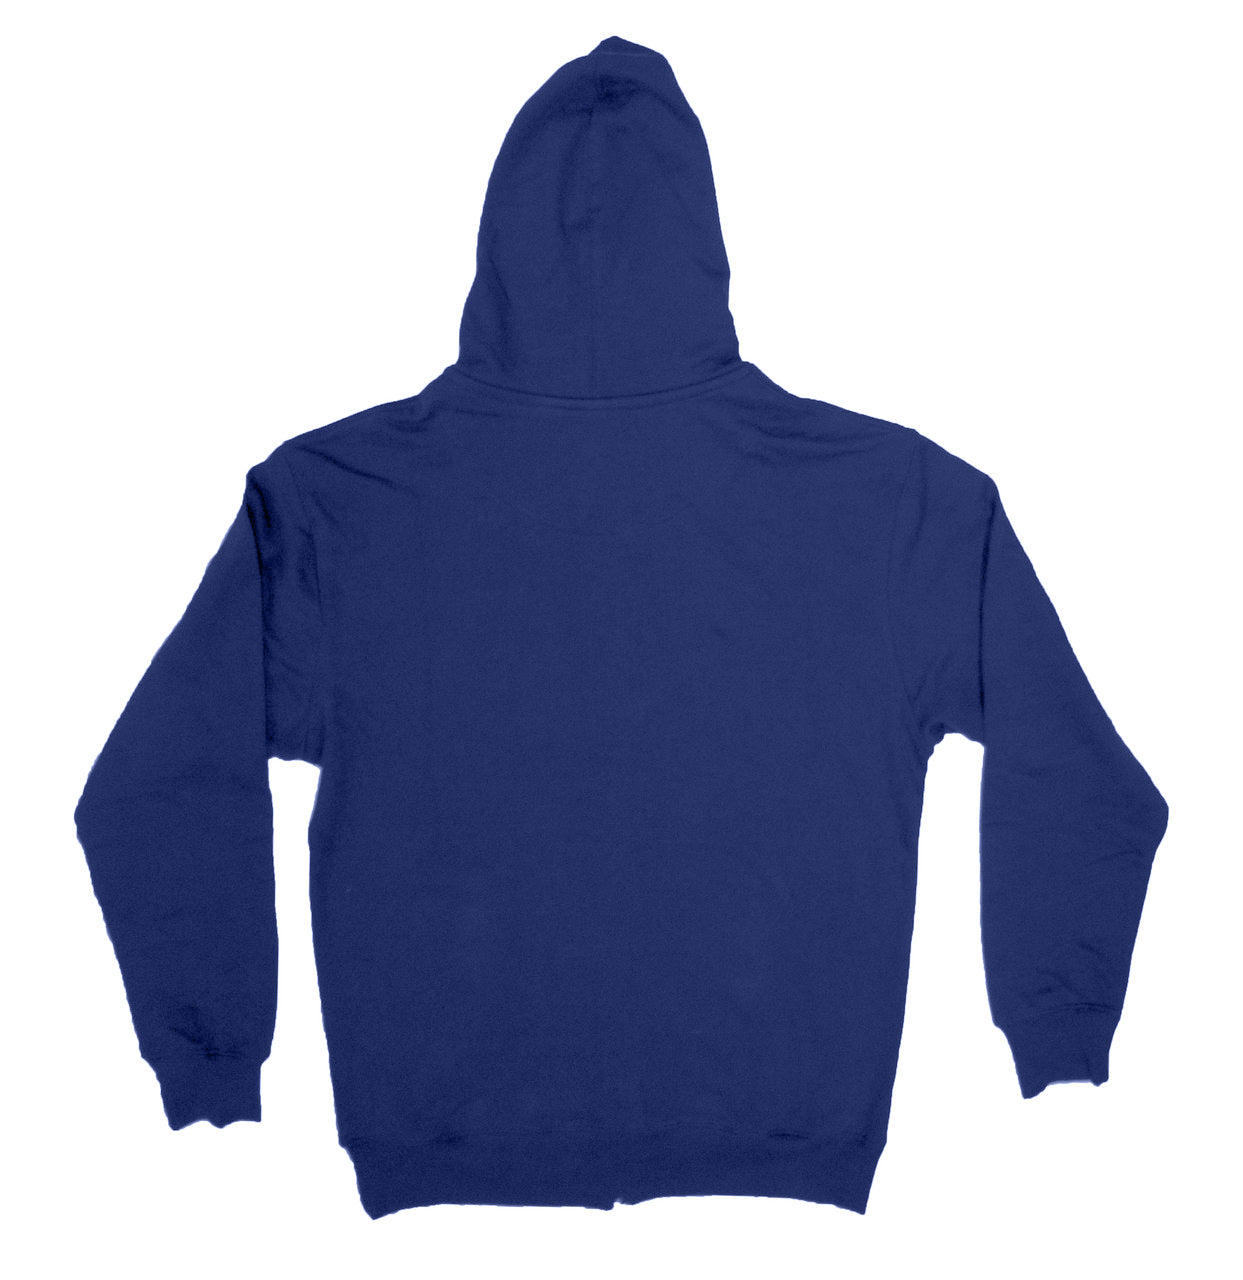 Etiko’s ethical fashion organic cotton navy zipped hoodie, Fairtrade Certified and eco-friendly